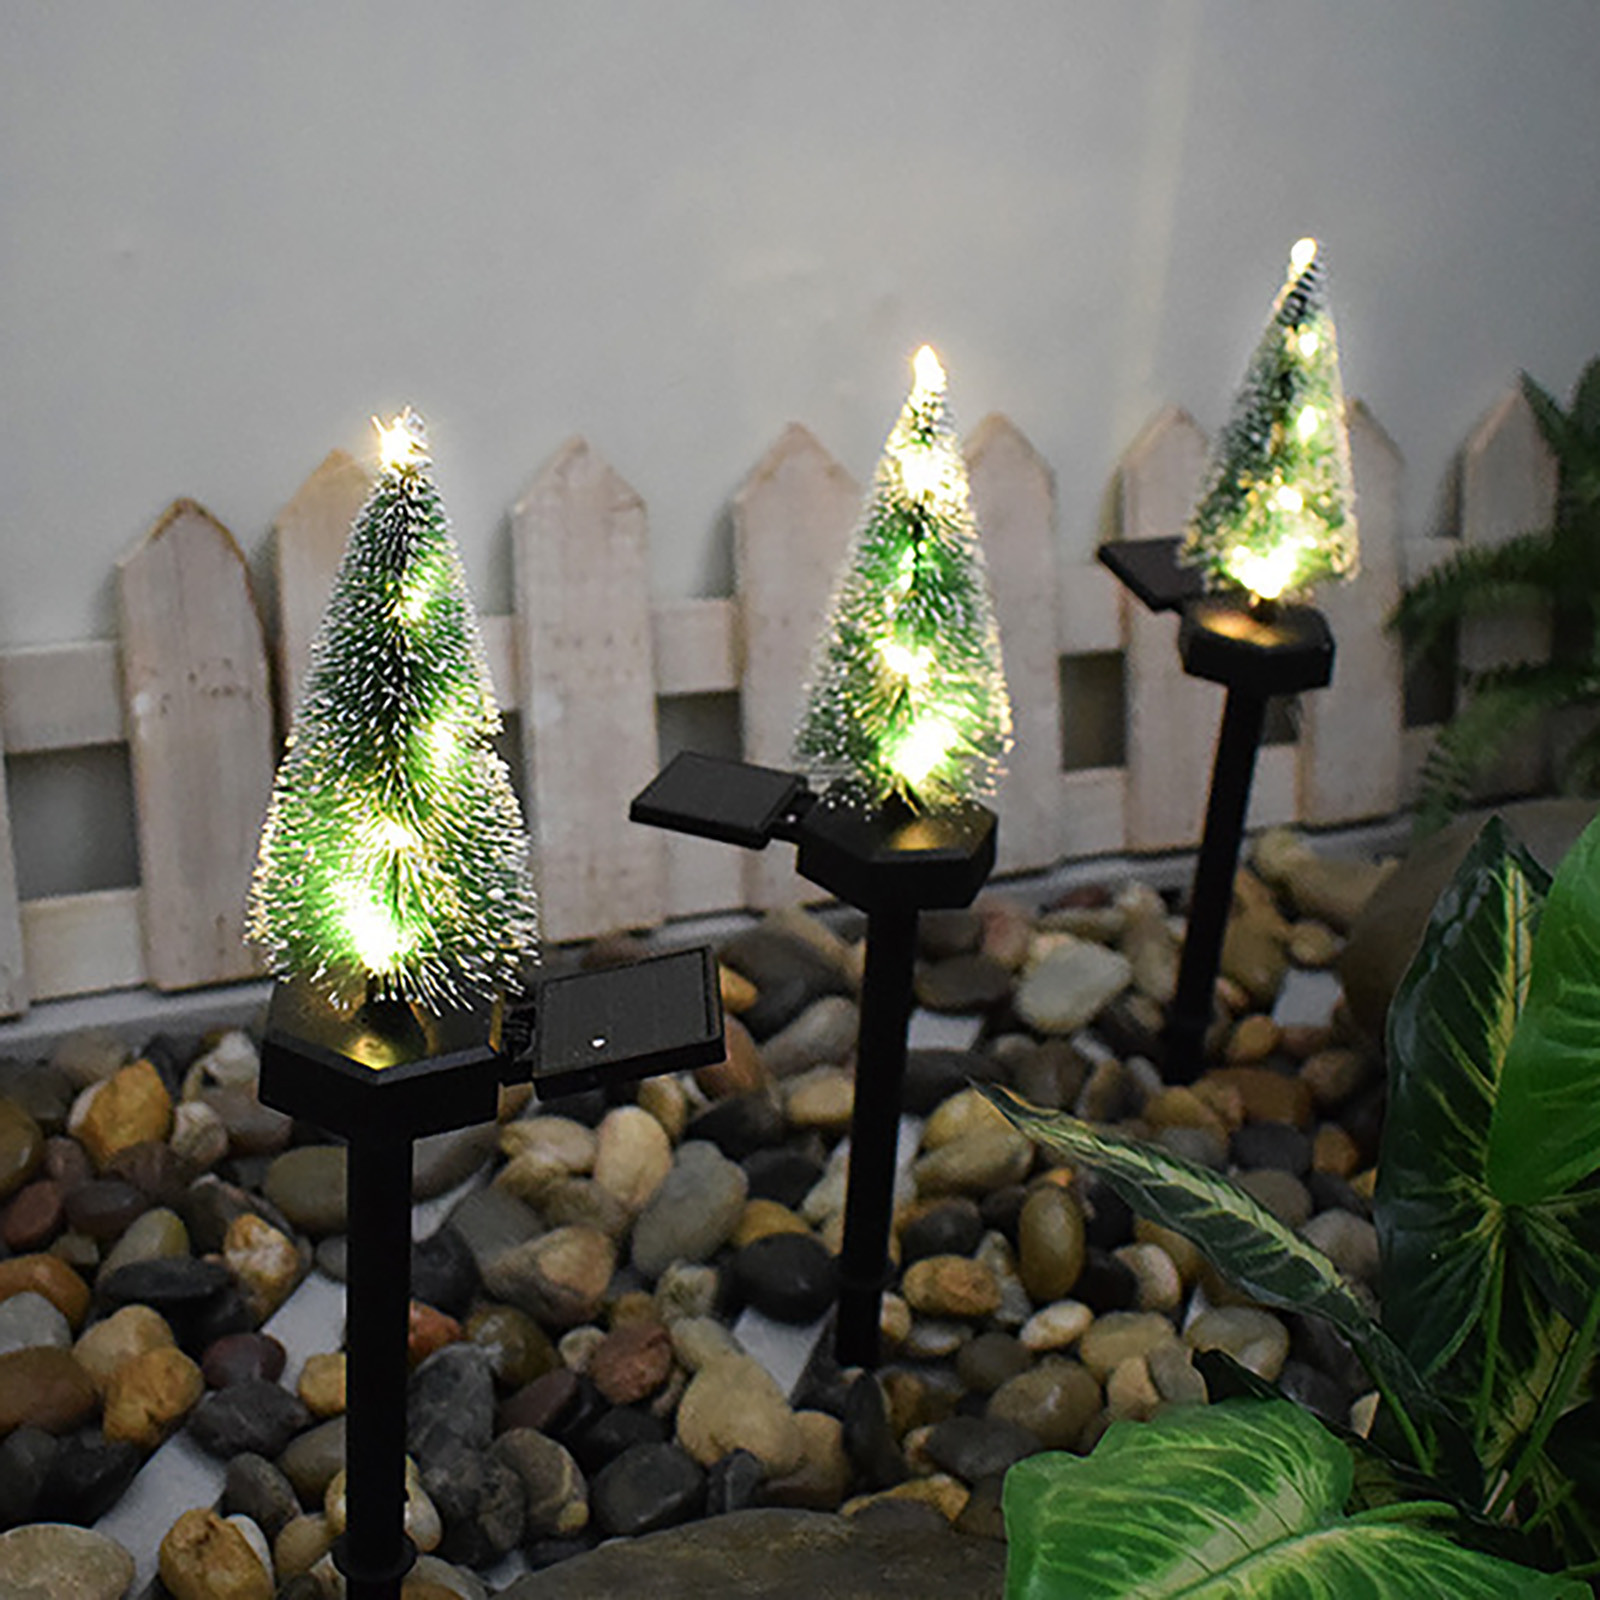 Christmas-Tree-Lights-Led-Solar-Light-For-Garden-Decoration-Lawn-Lamp-Outdoor-Home-Pathway-Bulb-Wate-1918433-11